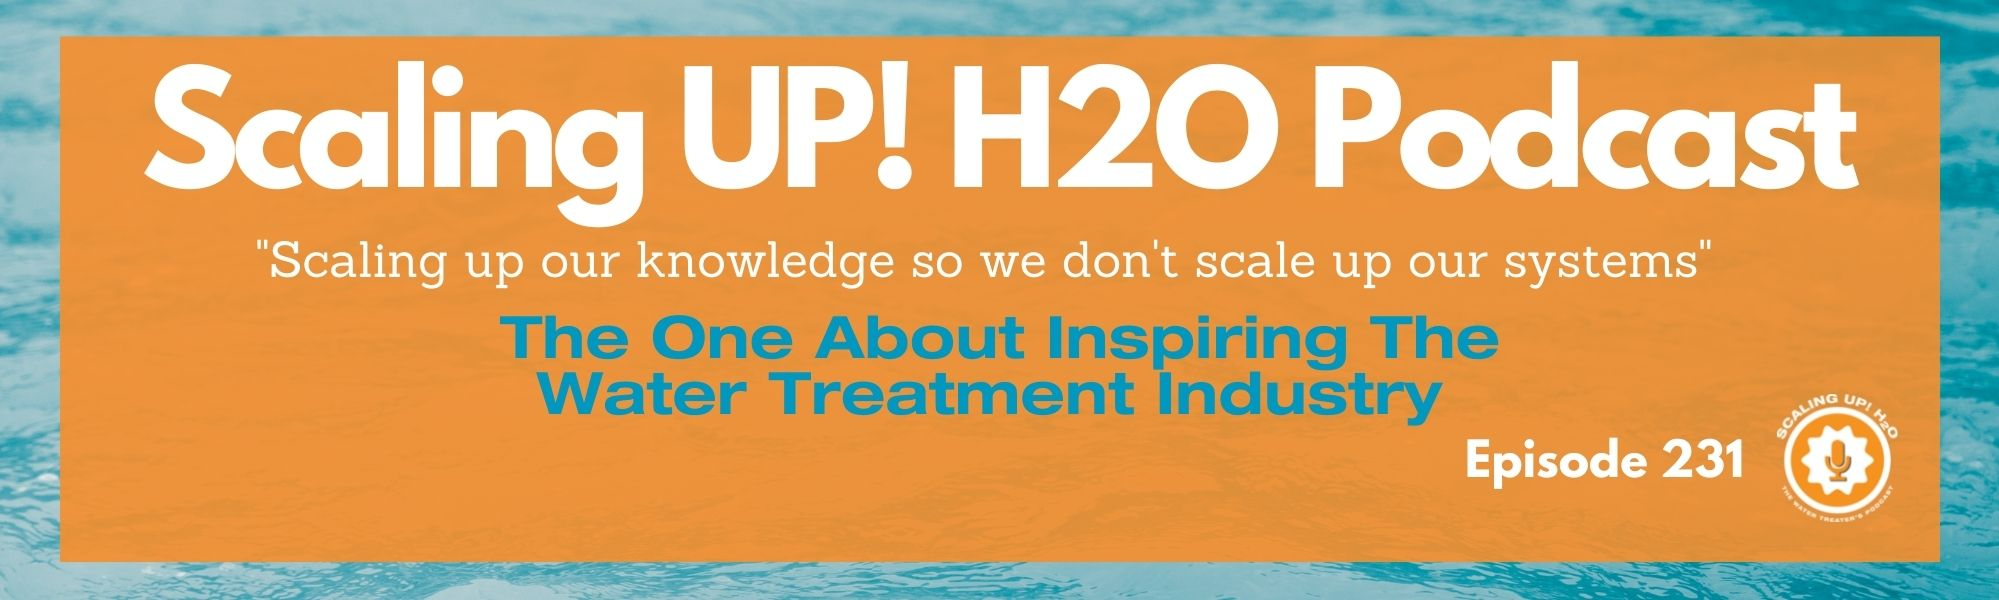 231 The One About Inspiring The Water Treatment Industry - Scaling UP! H2O